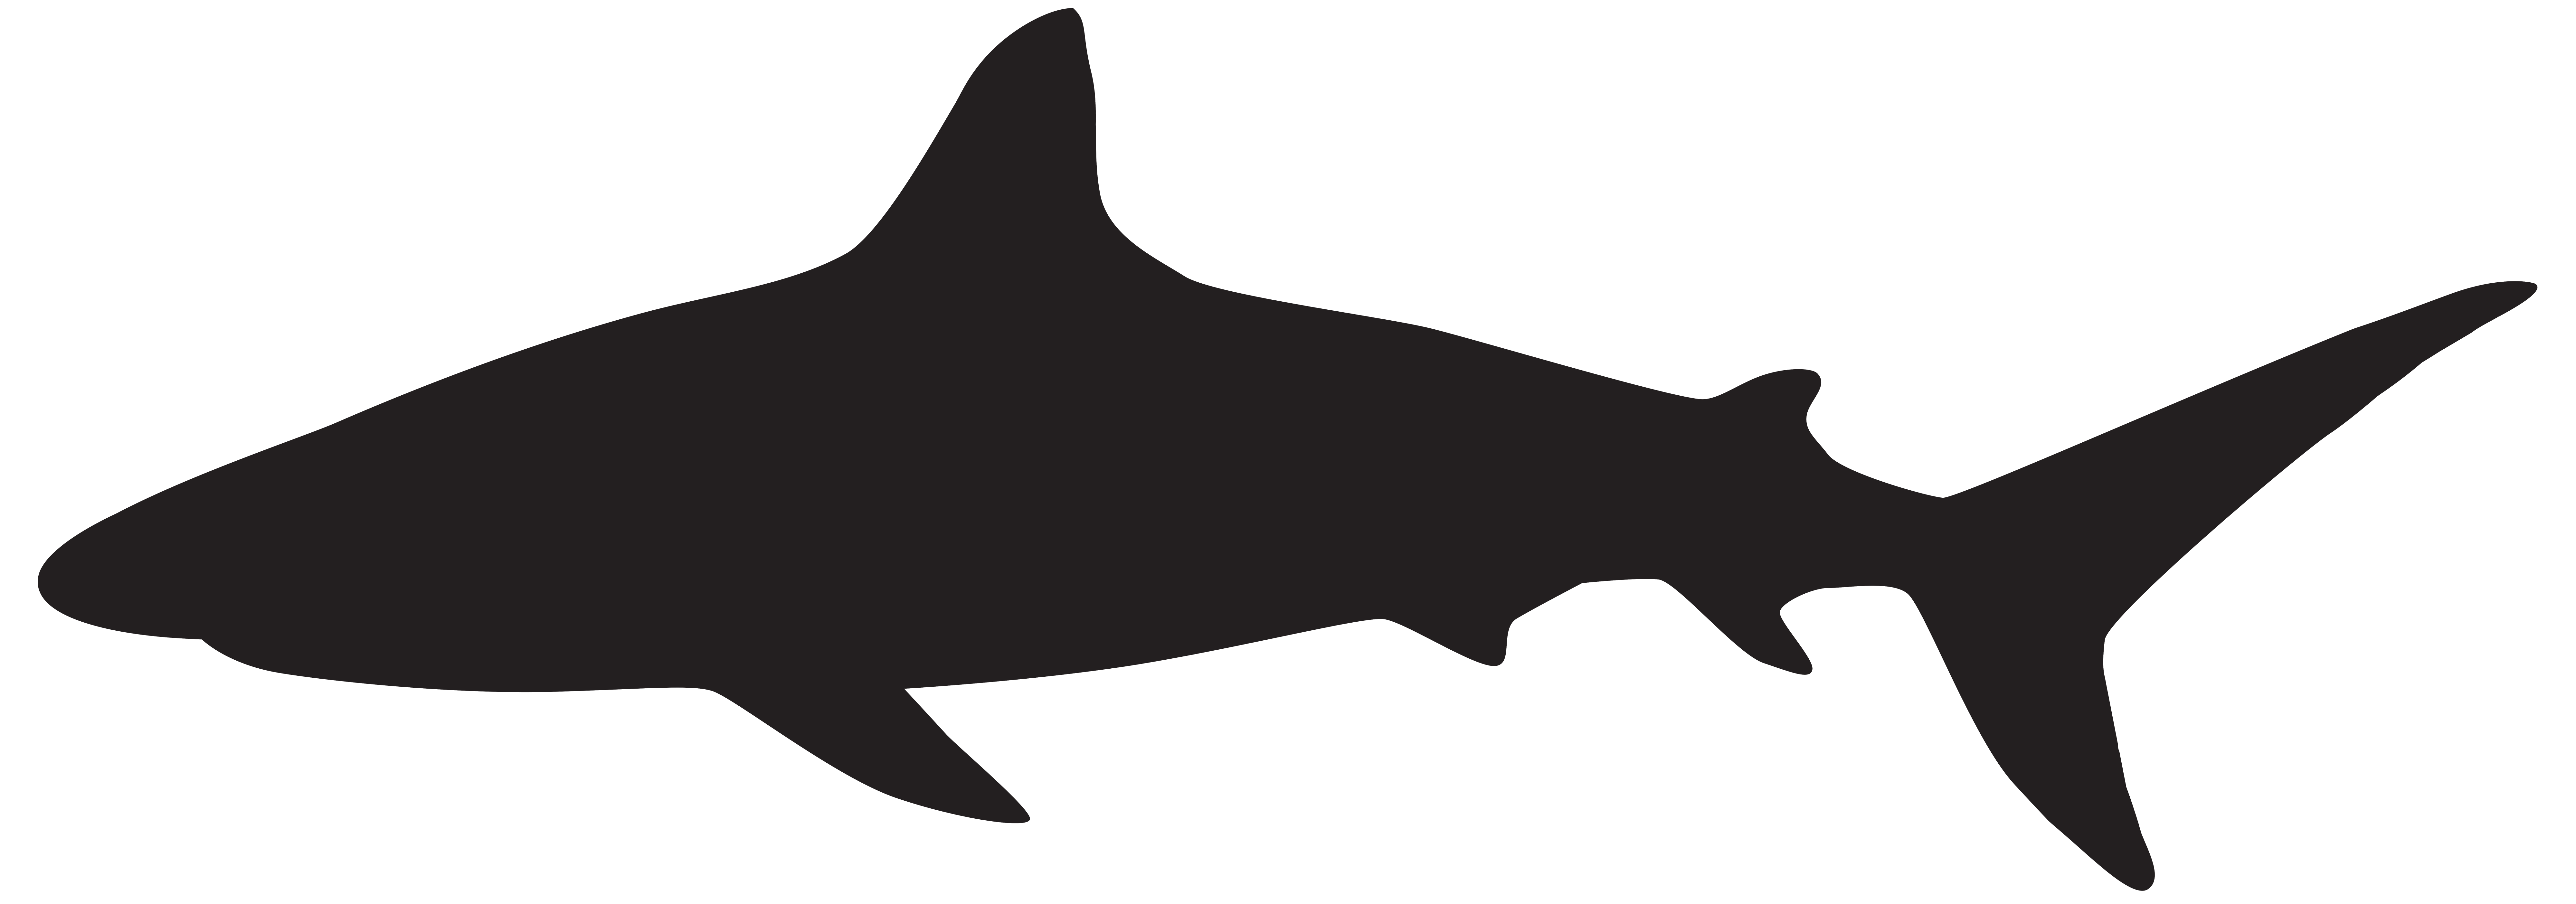 Shark clipart silhouette pictures on Cliparts Pub 2020! 🔝